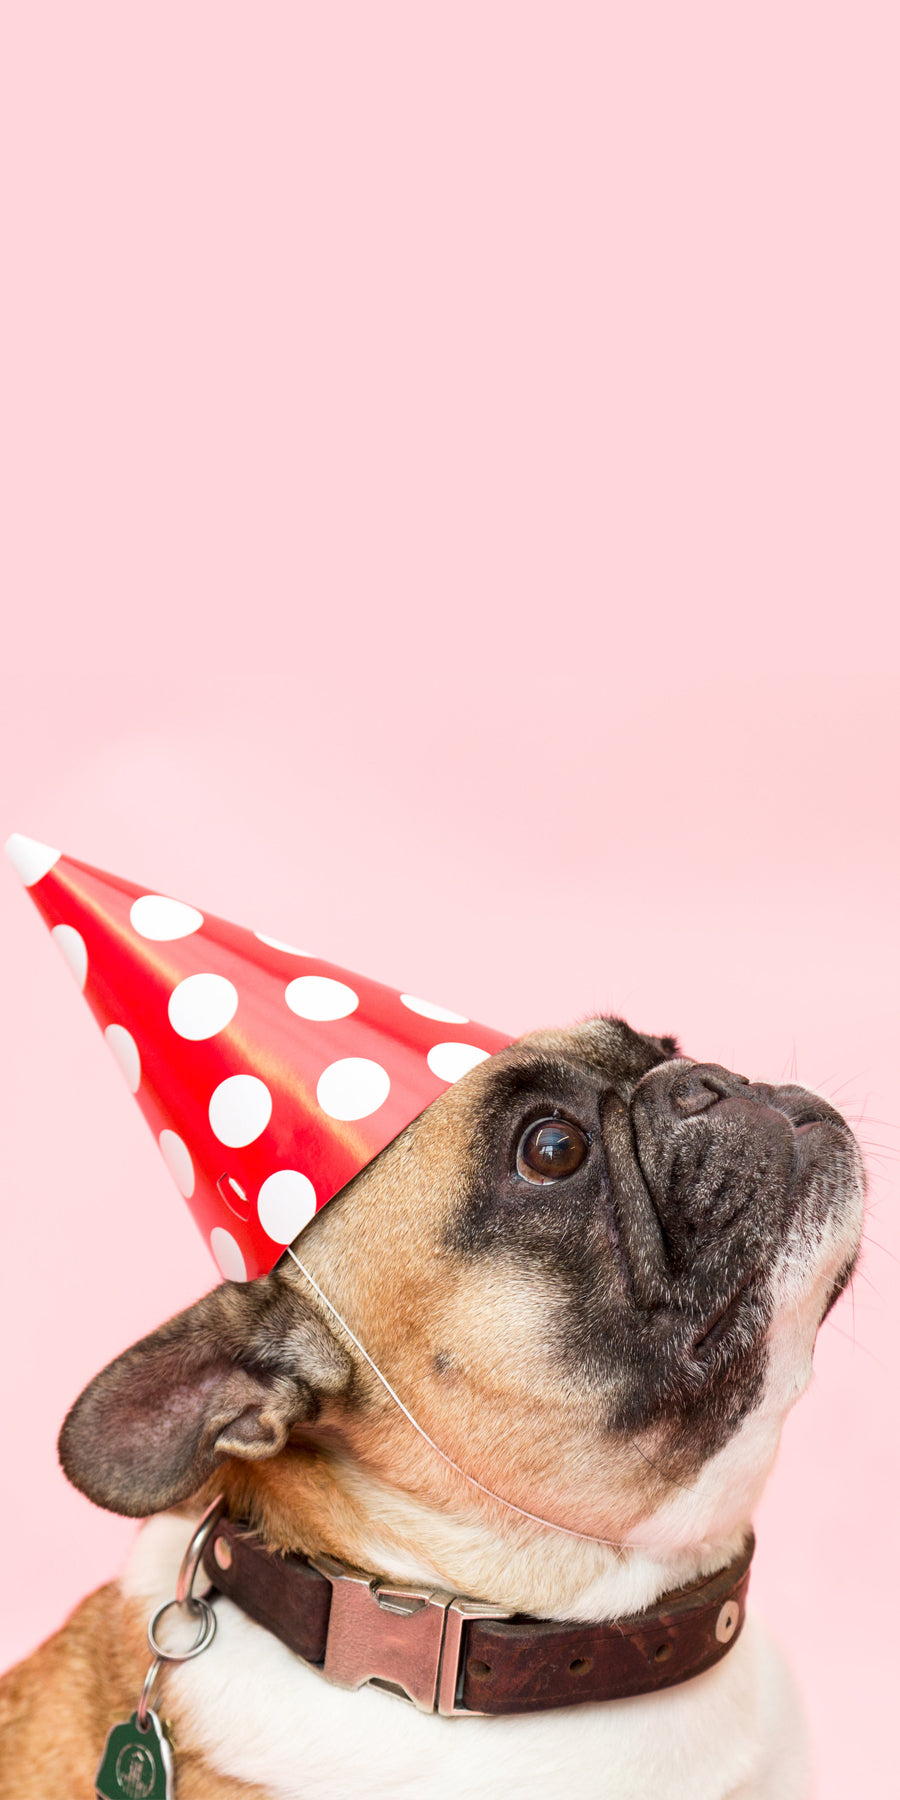 Frenchie dog with a red spotted party hat on looking up